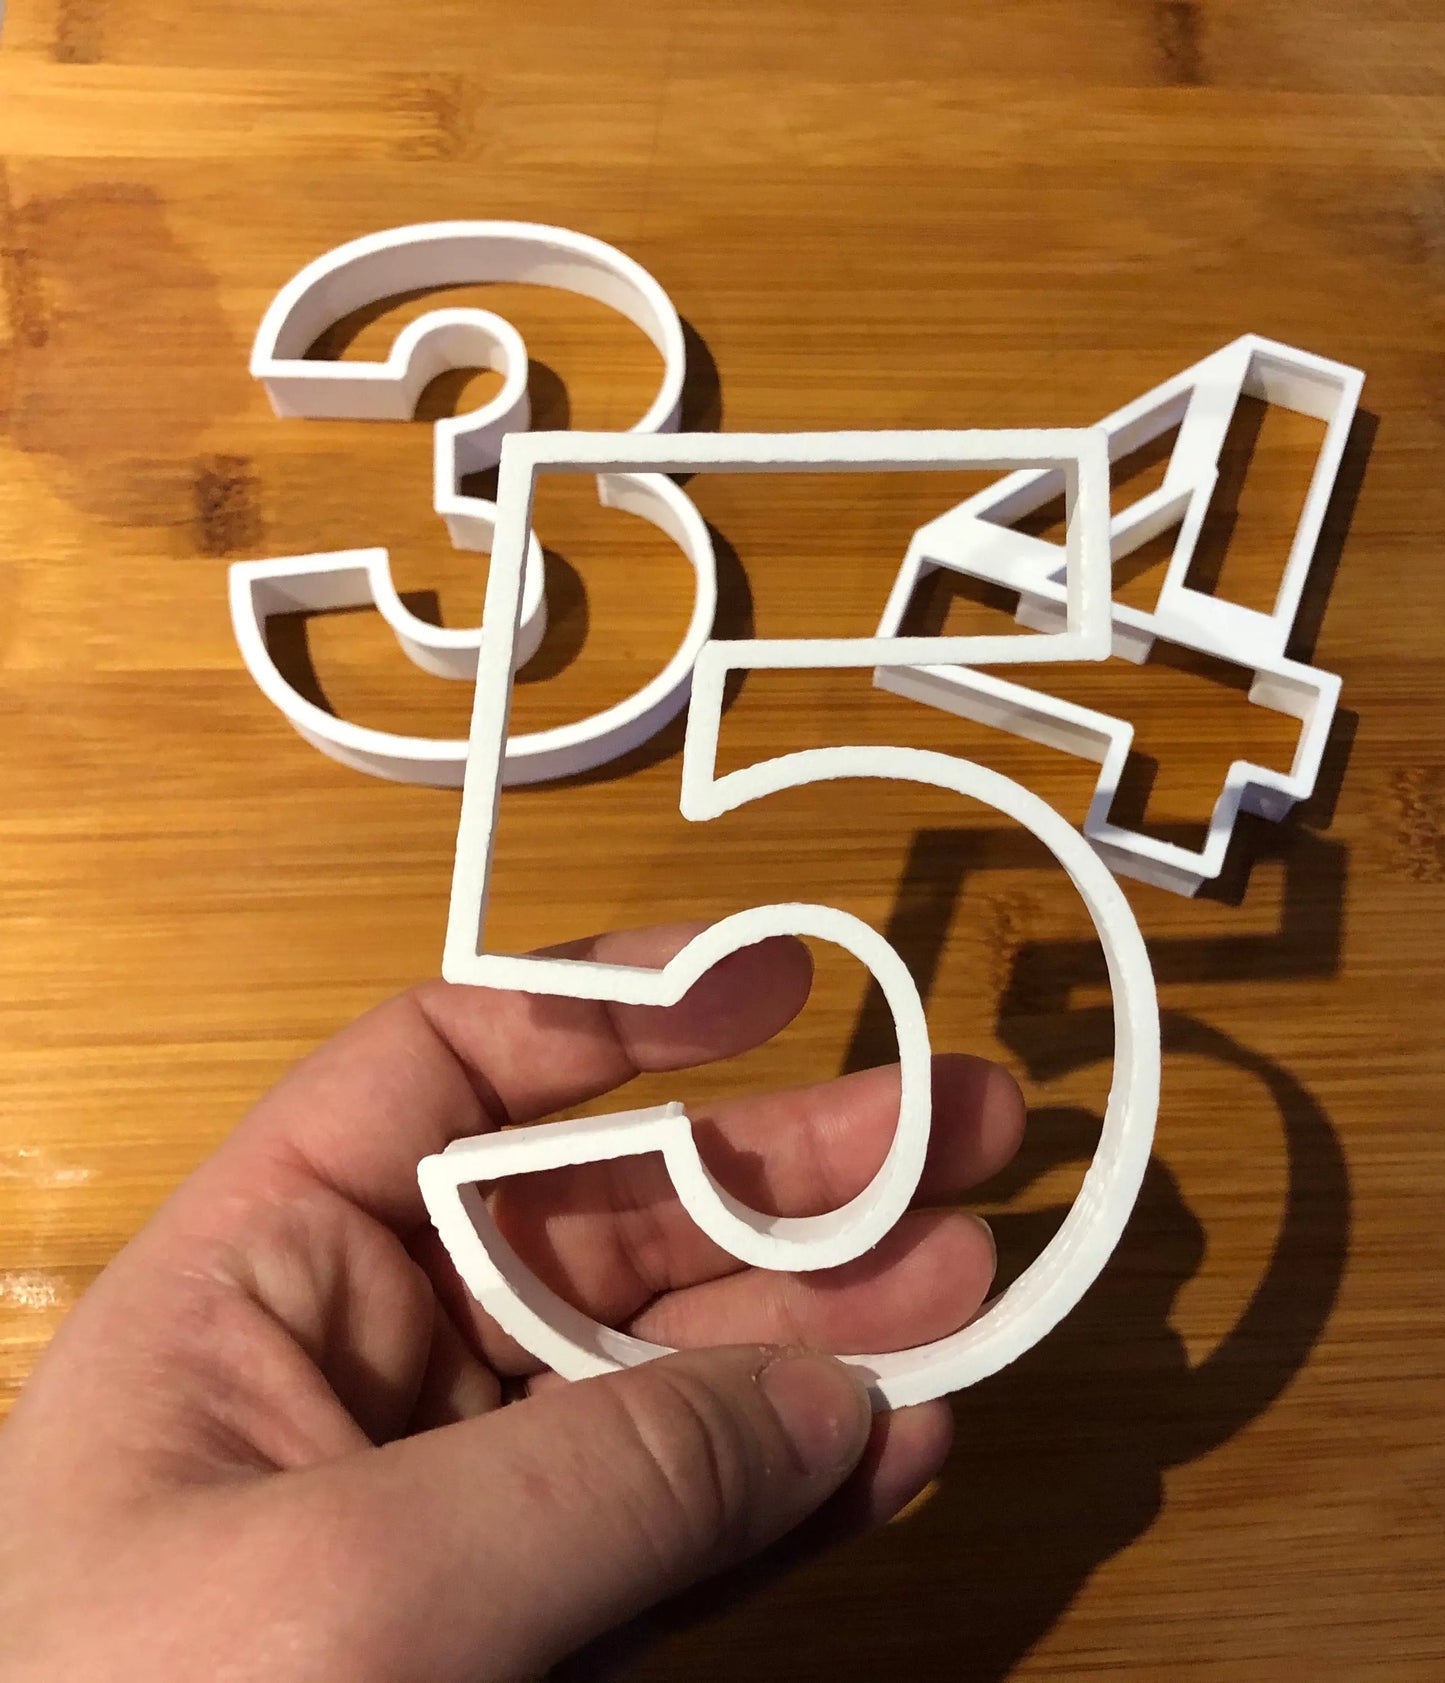 Numbers 0 to 9 - Cookie Cutter (1) MEG cookie cutters